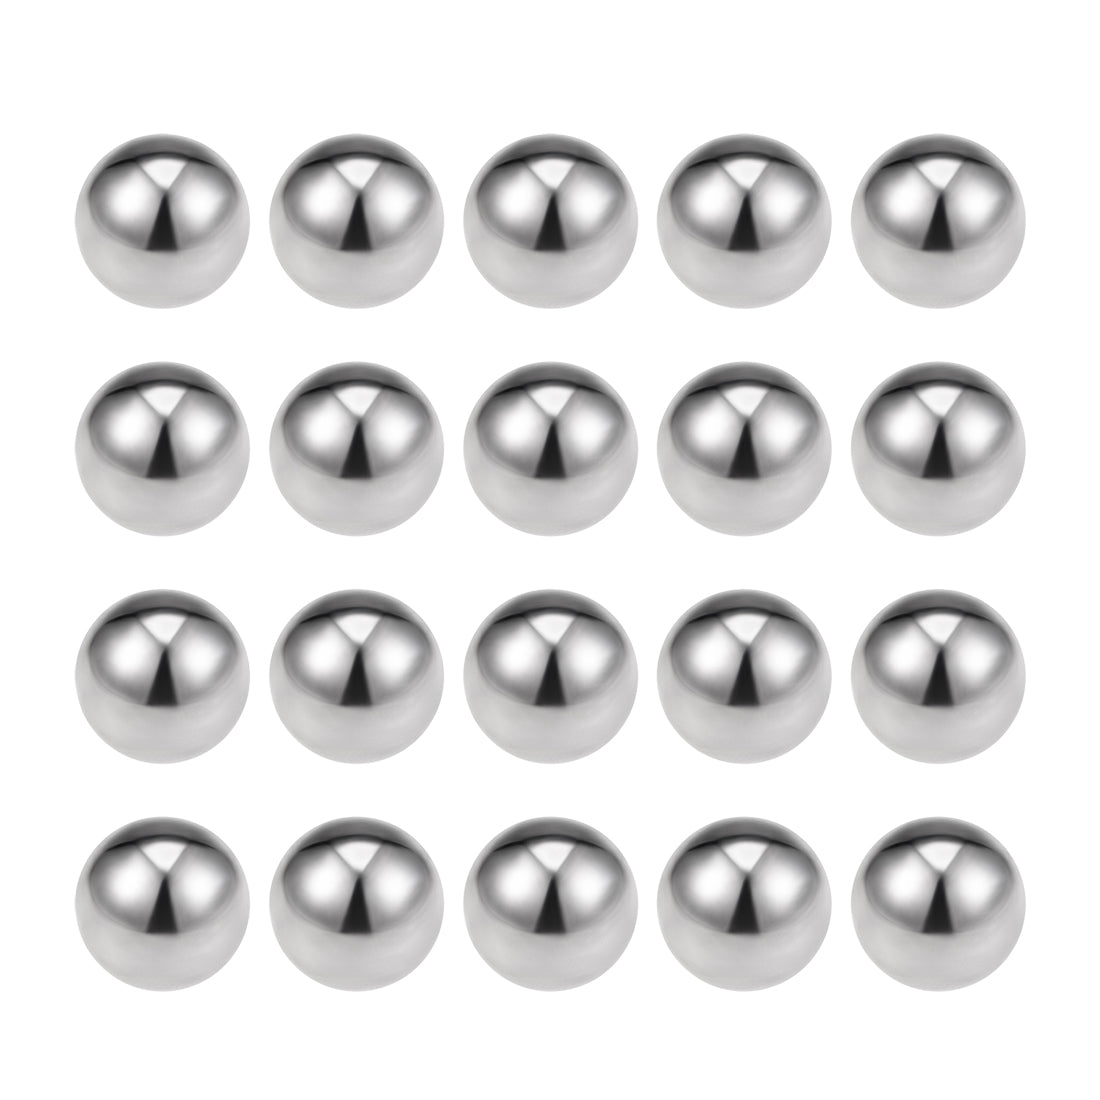 Uxcell Uxcell 1/4" Bearing Balls 316L Stainless Steel G100 Precision Balls 100pcs